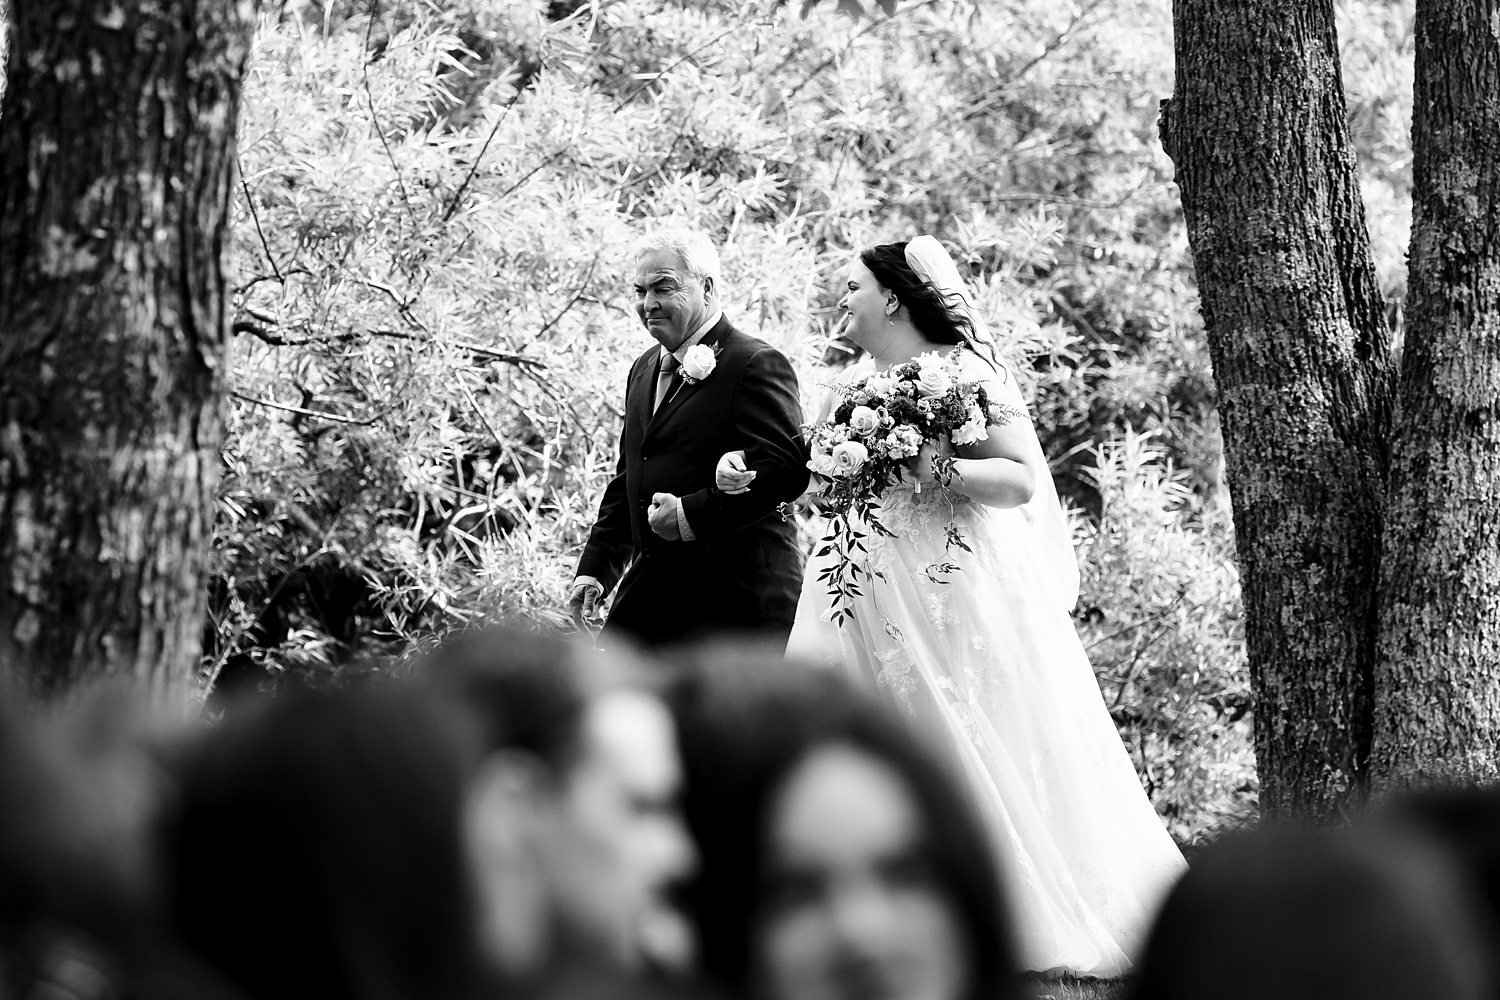 The bride and her father walk to the wedding ceremony site